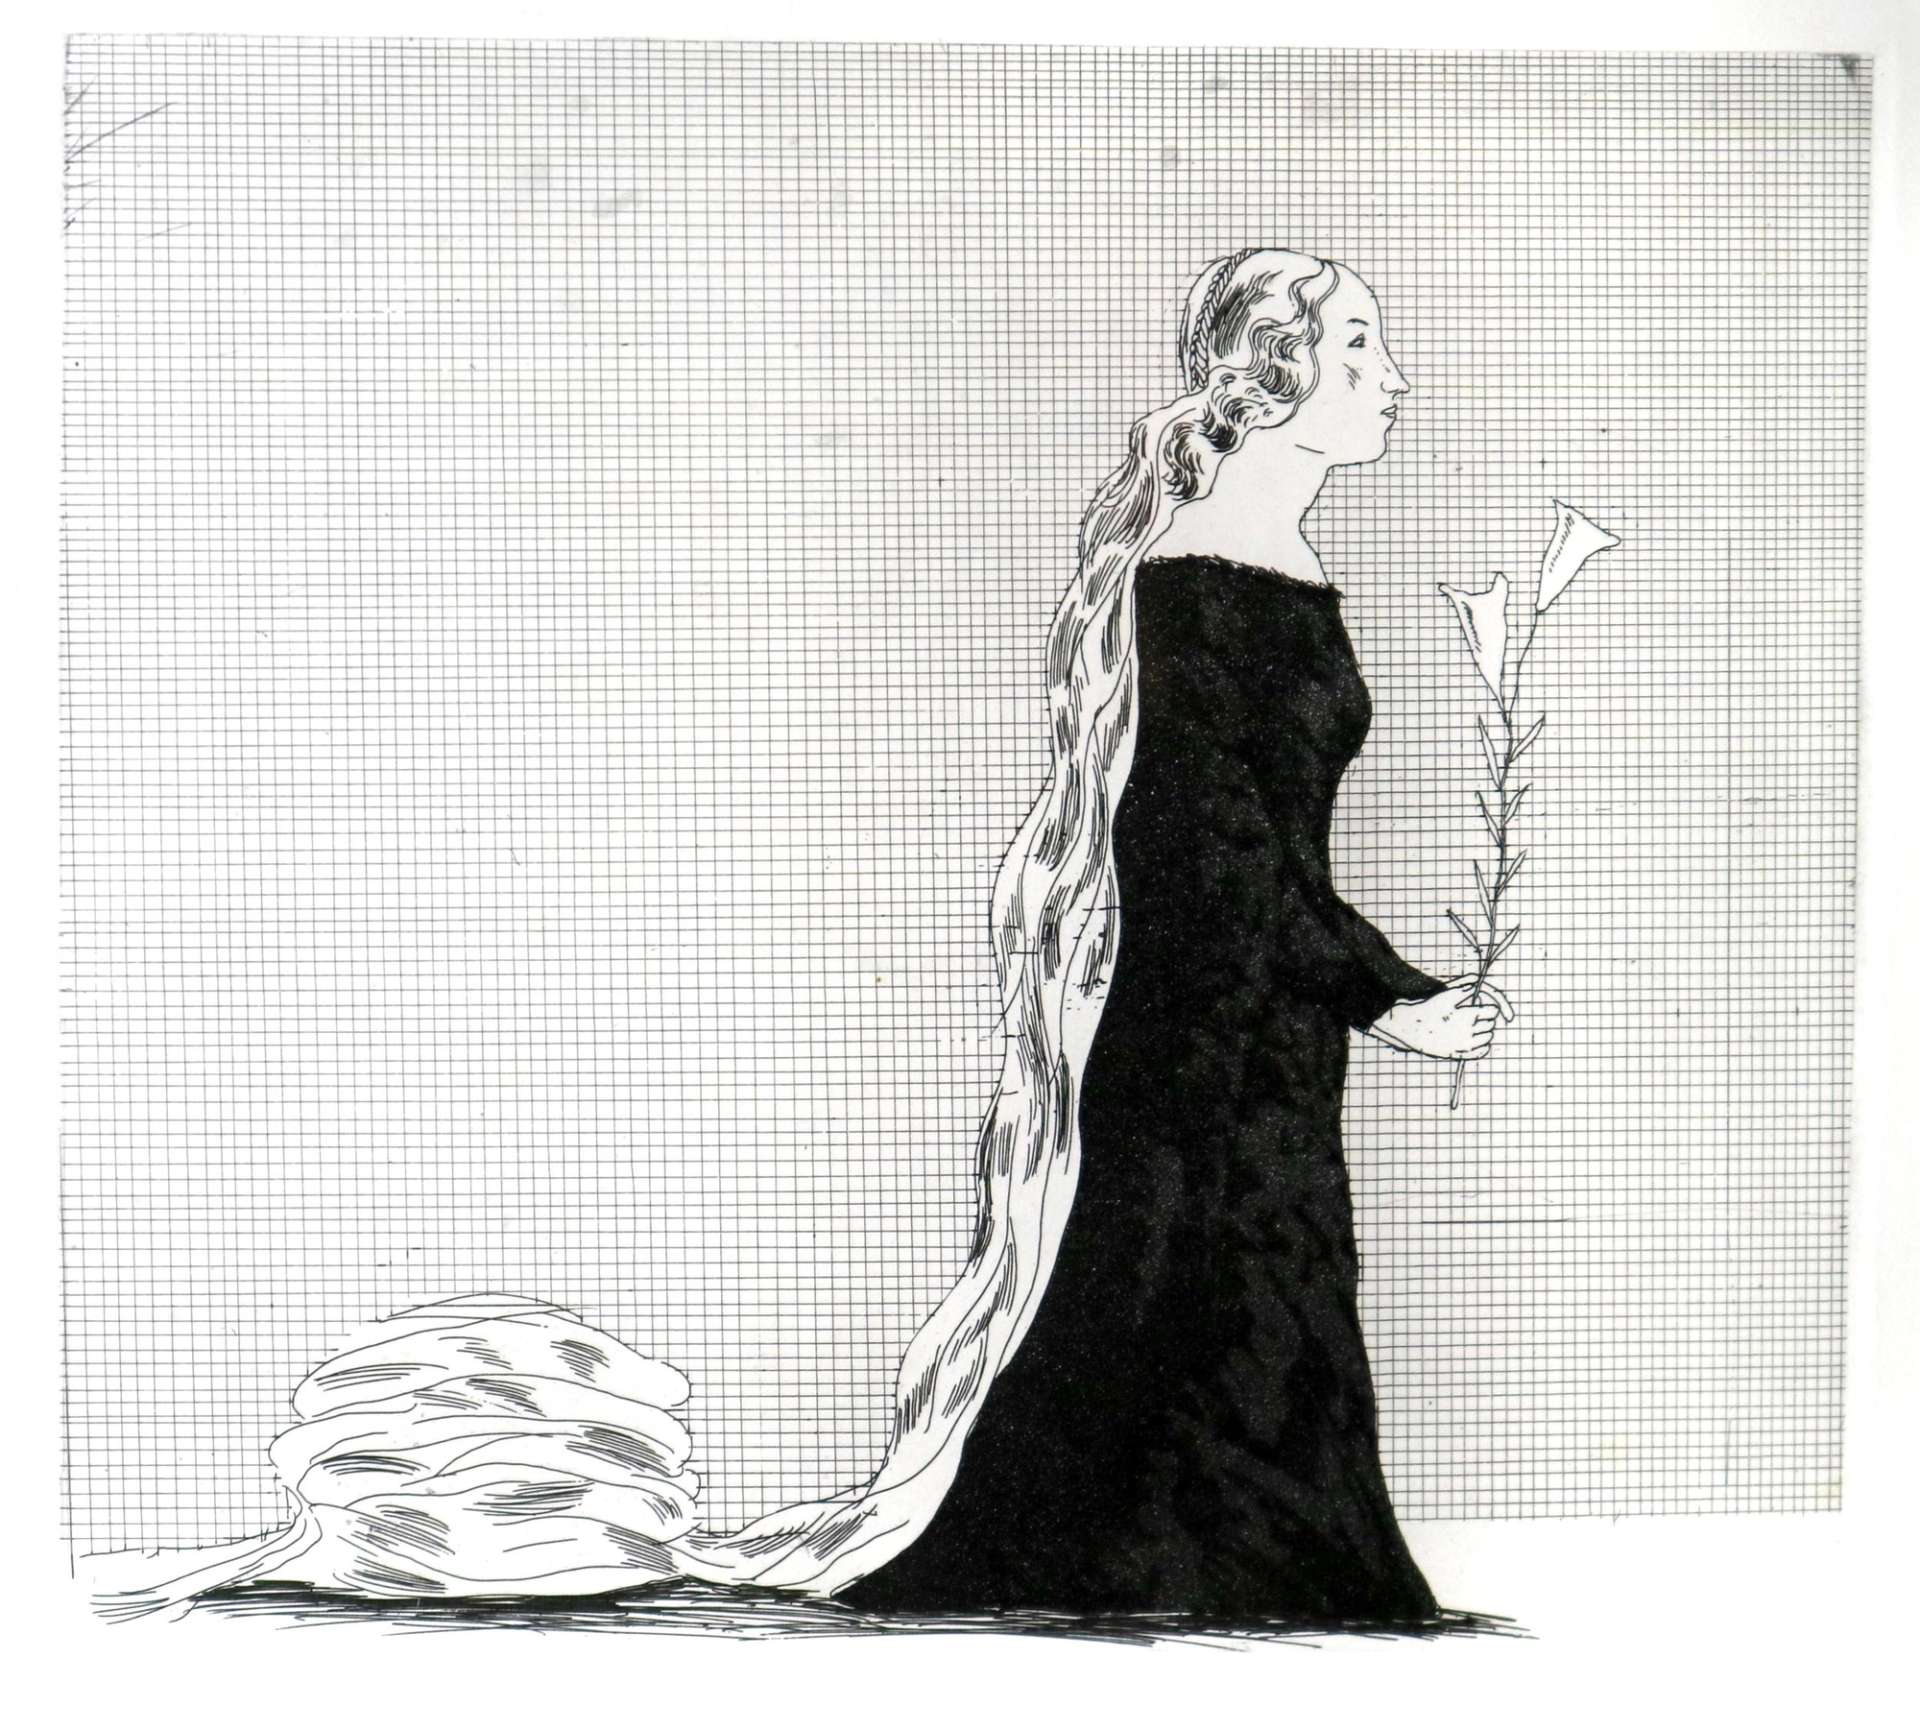 An image of the artwork The Older Rapunzel by David Hockney, showing a monochrome female figure with very long hair, holding a flower stem. She is wearing a black dress and her hair piles up behind her, as she stands against a background etched in fine lines.